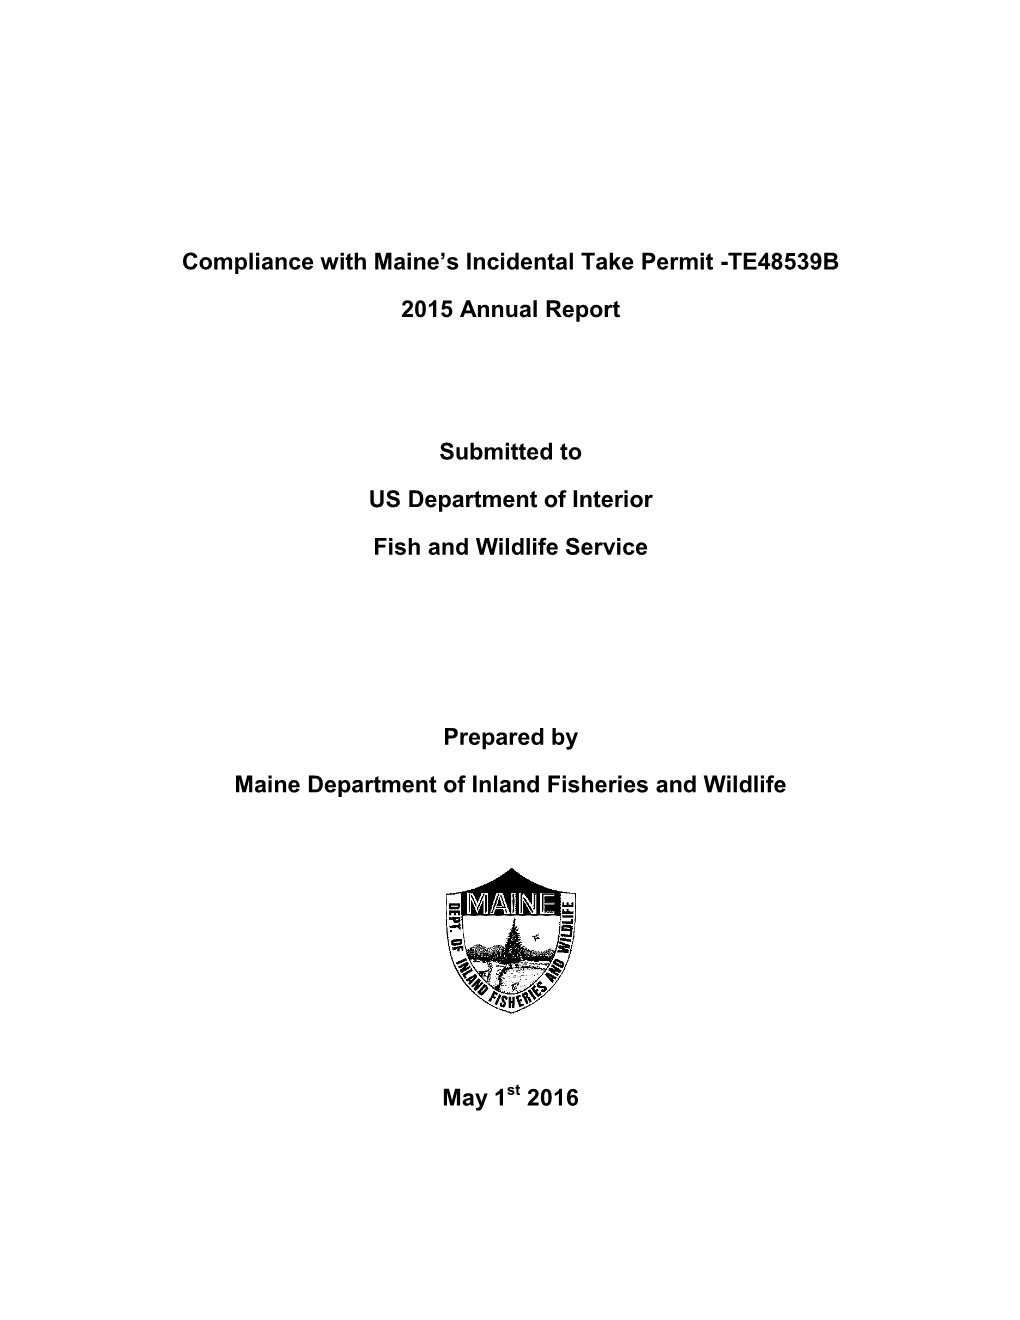 Compliance with Maine's Incidental Take Permit -TE48539B 2015 Annual Report Submitted to US Department of Interior Fish